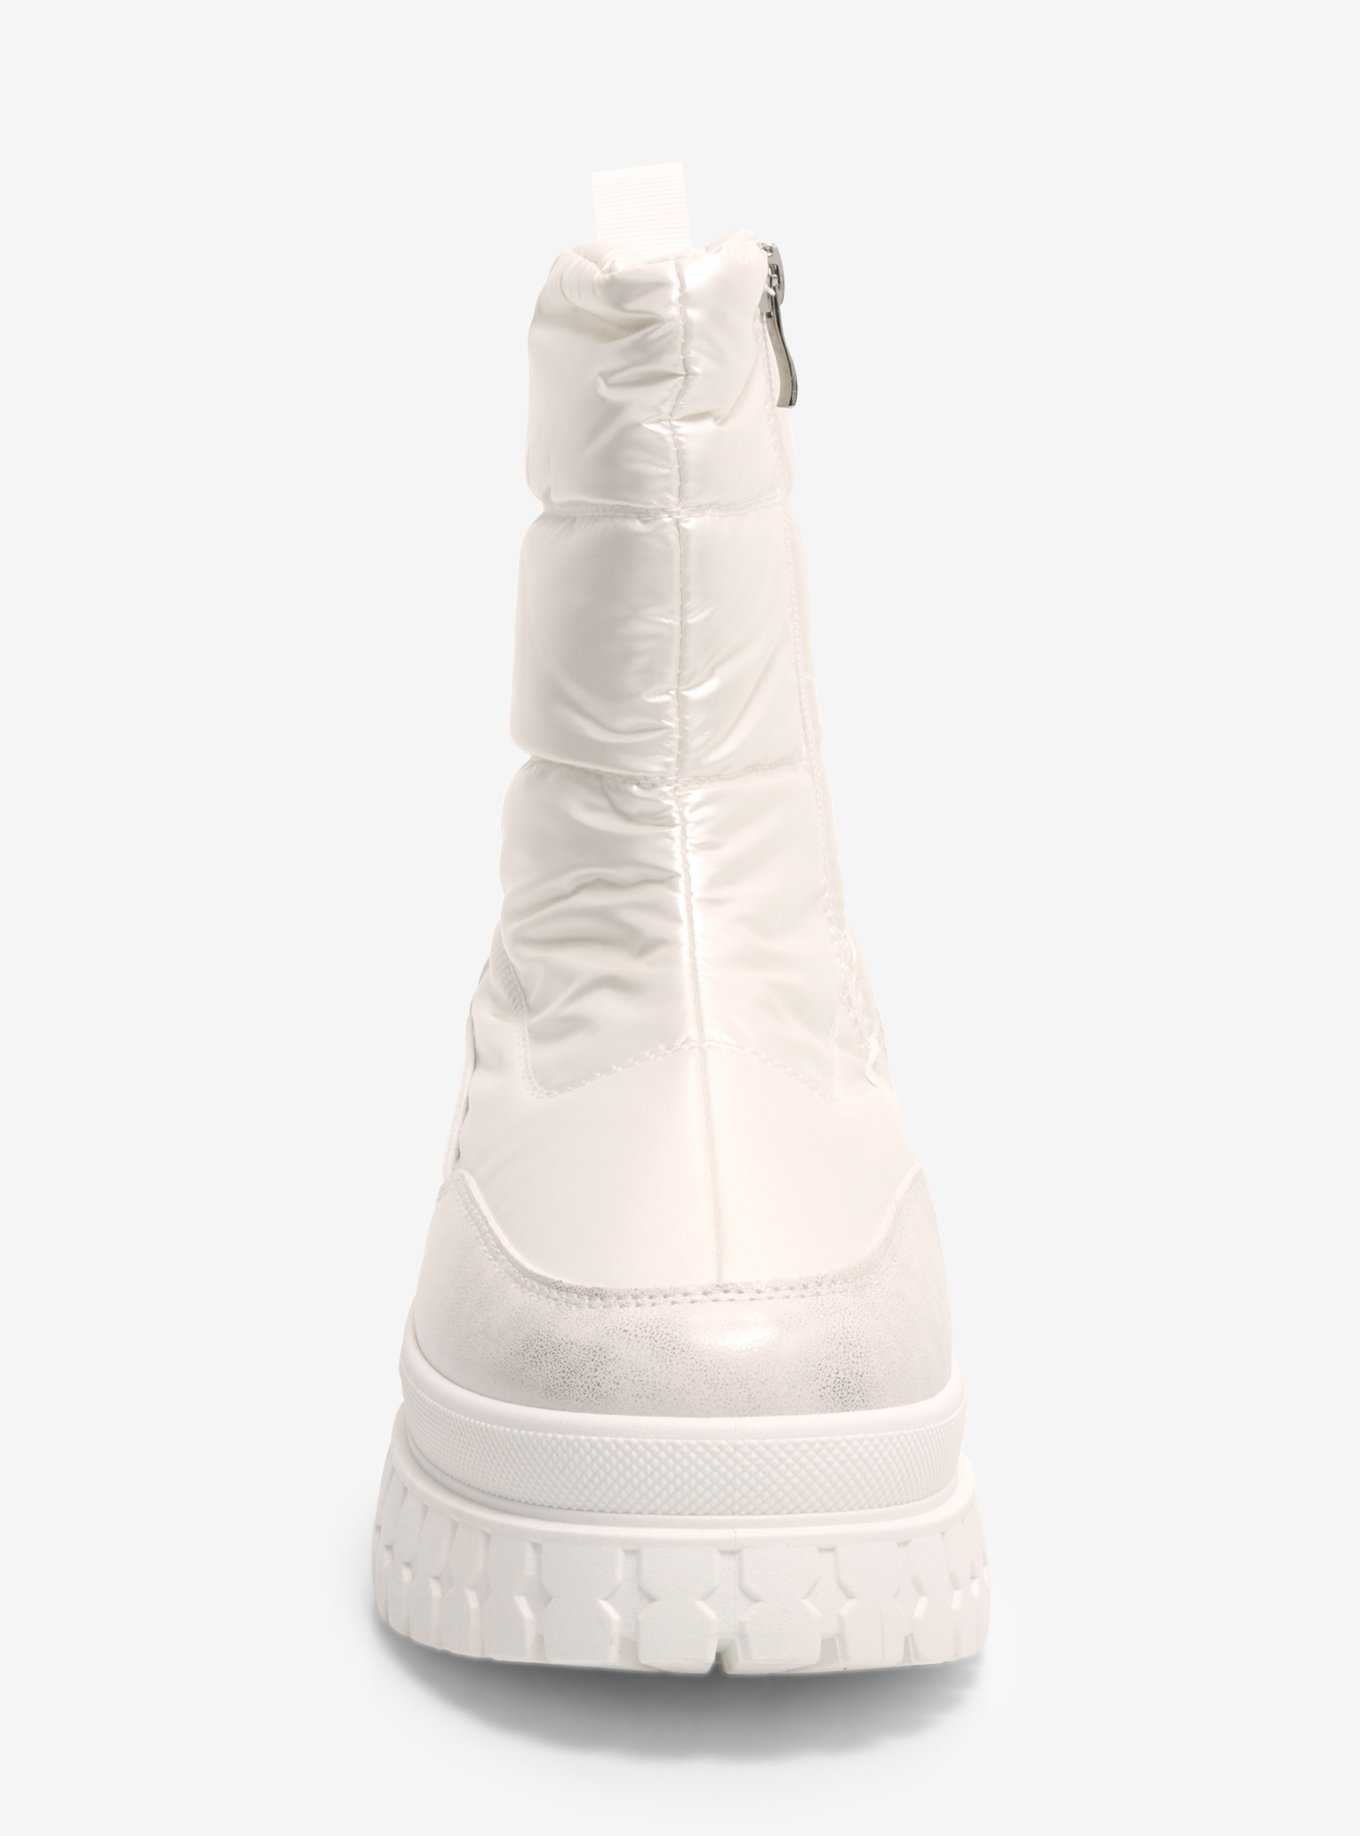 Dirty Laundry White Puffer Chunky Boots, , hi-res